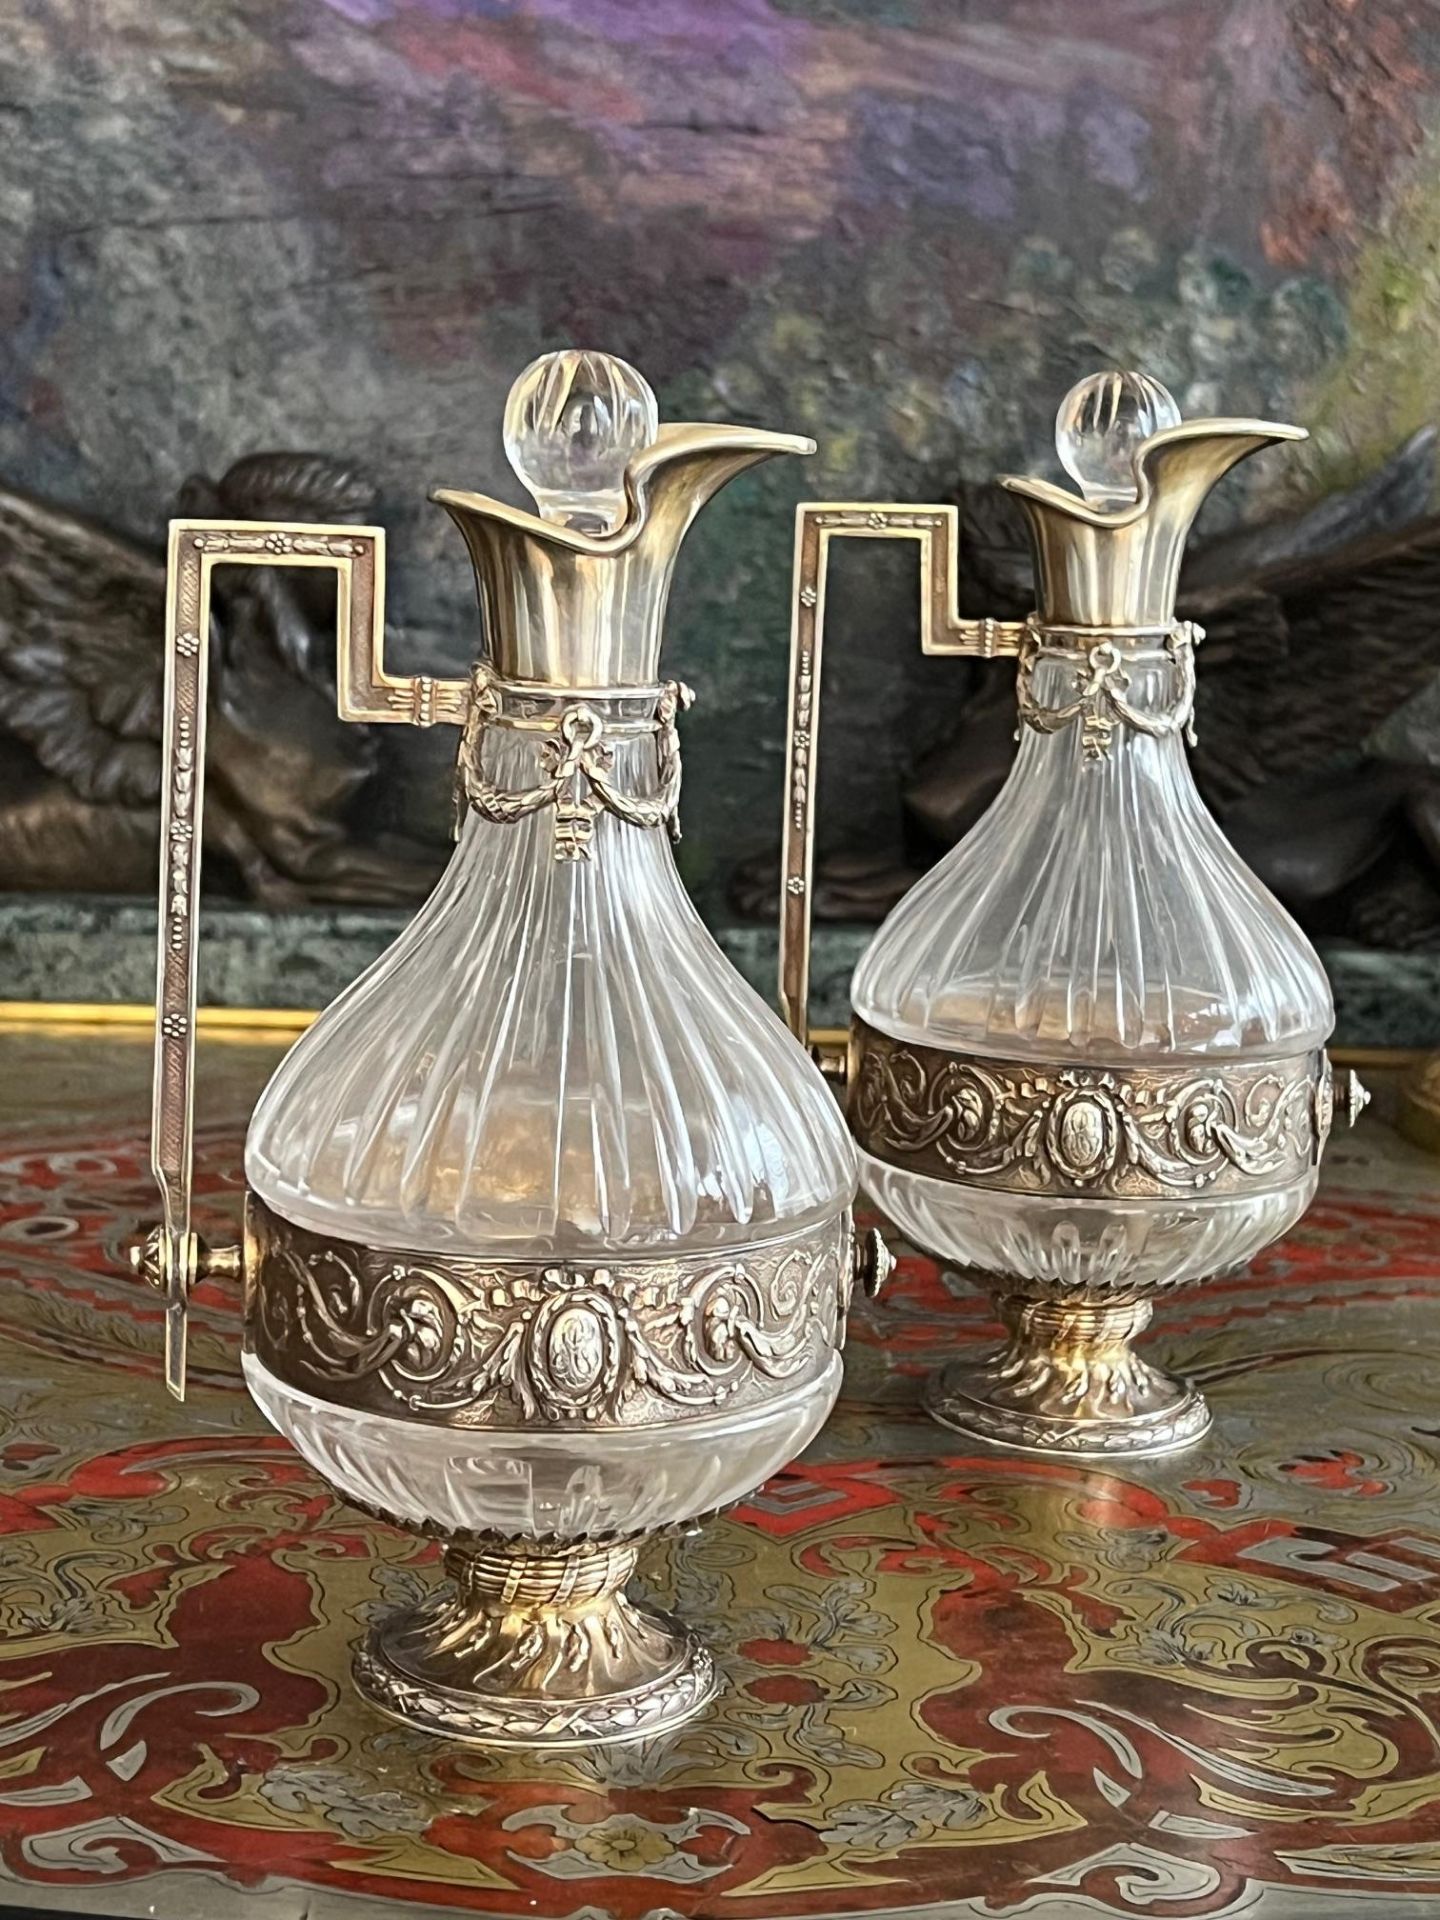 A PAIR OF 19TH CENTURY FRENCH SILVER AND GLASS LIQUOR JUGS - Image 2 of 7